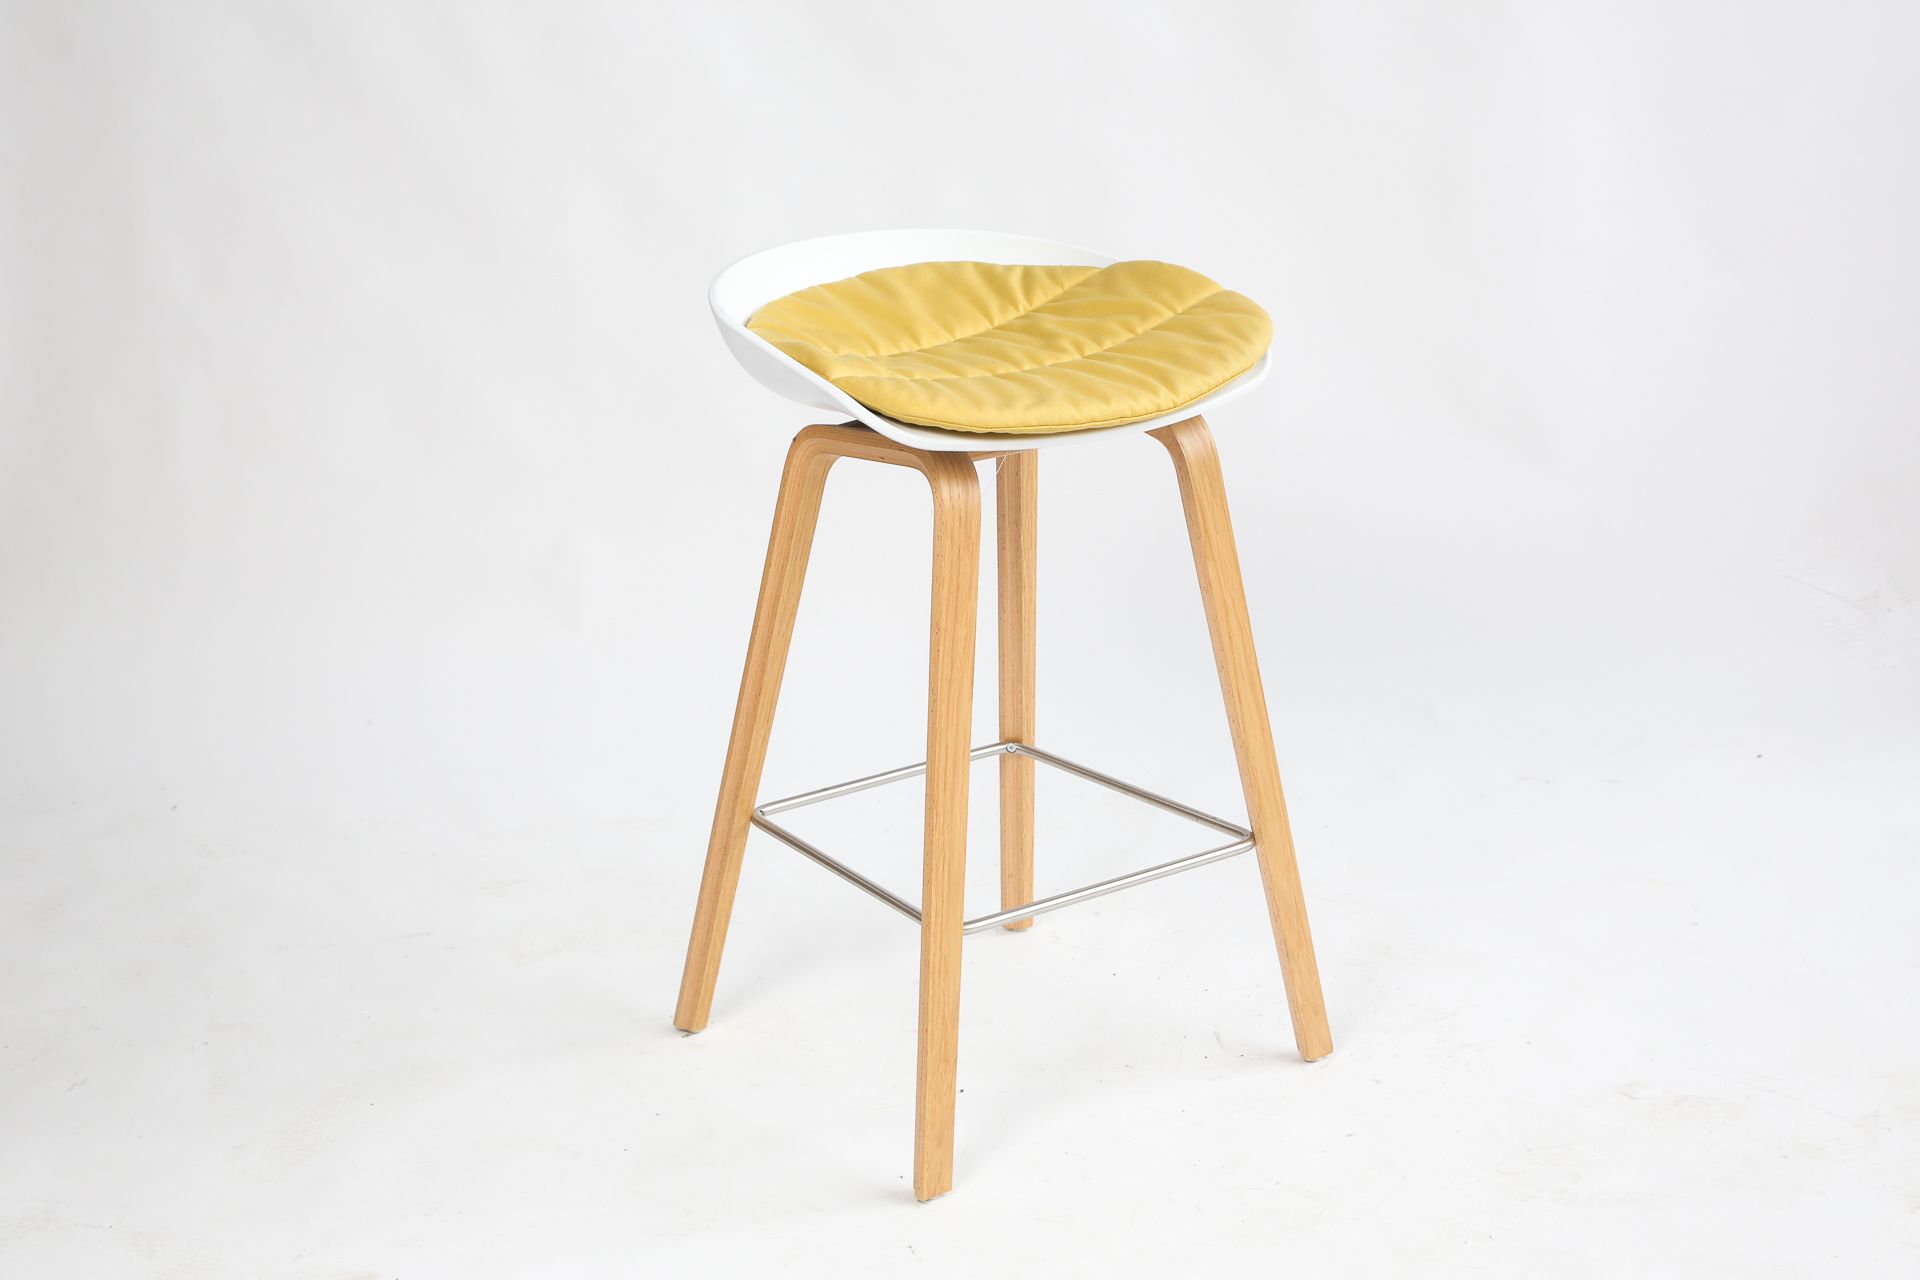 Null HEE WEILLING, HAY EDITEUR, About A Stool / AAS32 Low

4条腿的木质底座 - 橡木亚光漆面

白色&hellip;